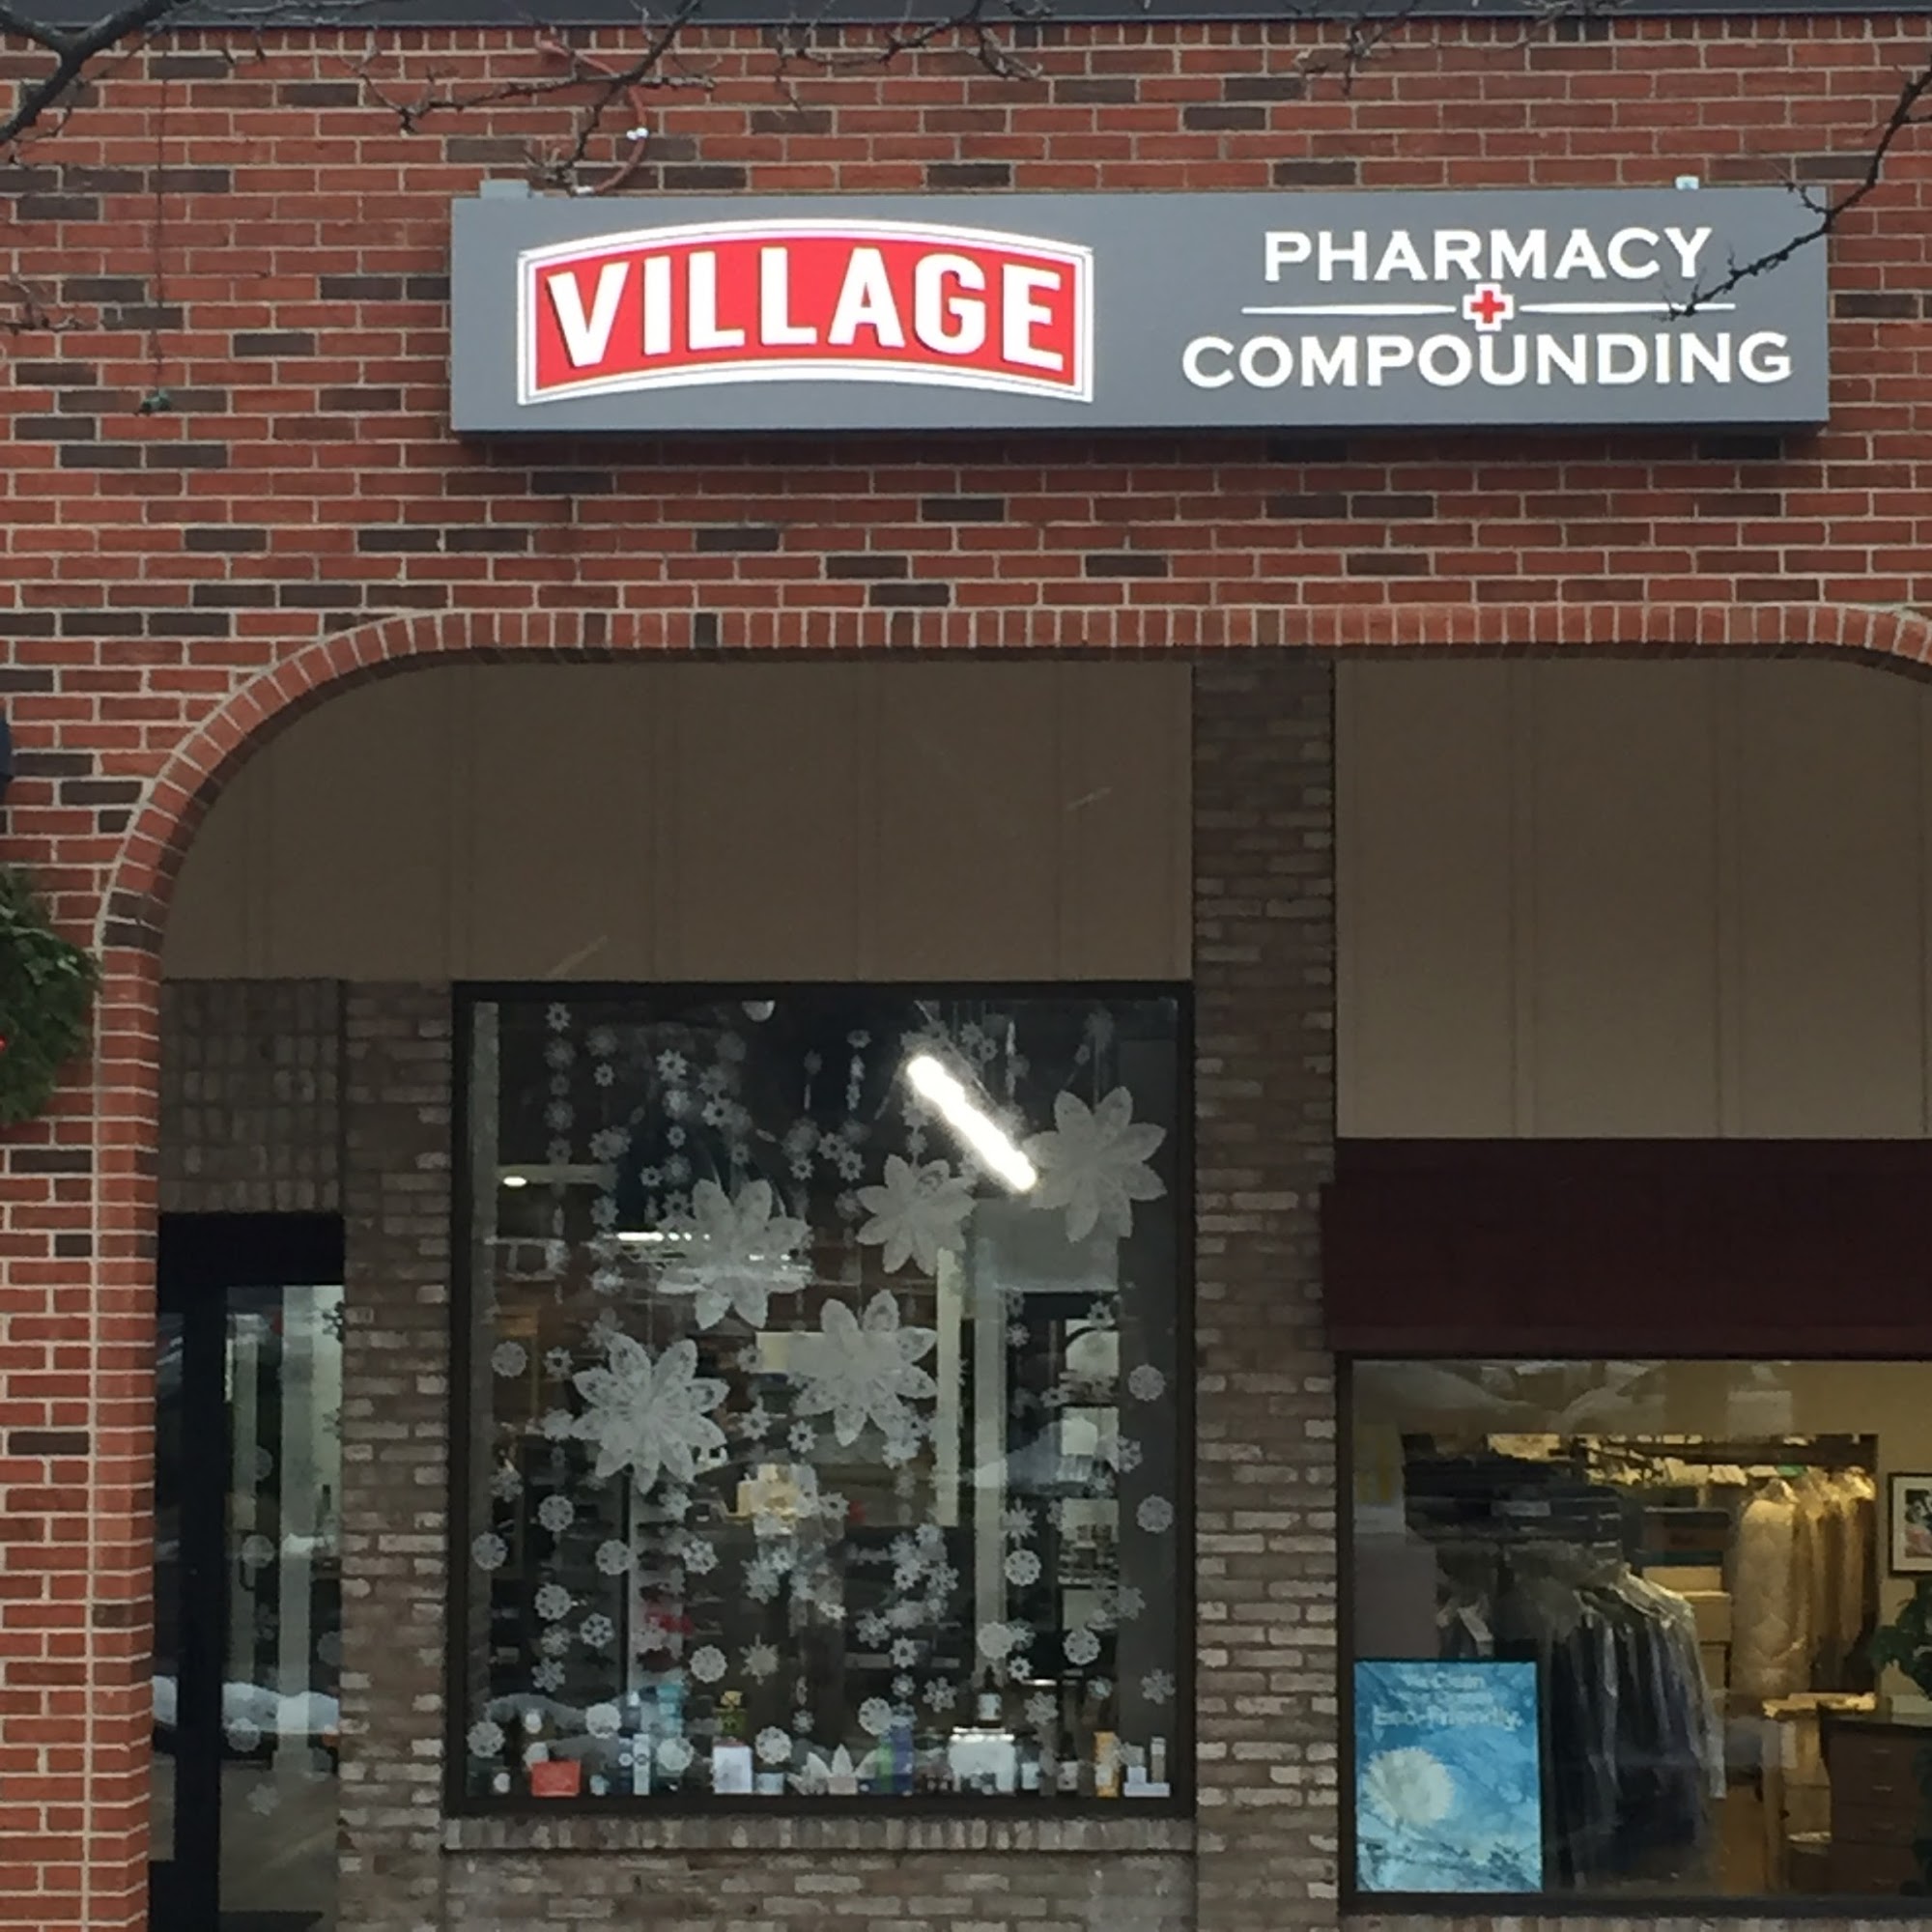 Village Pharmacy and Compounding